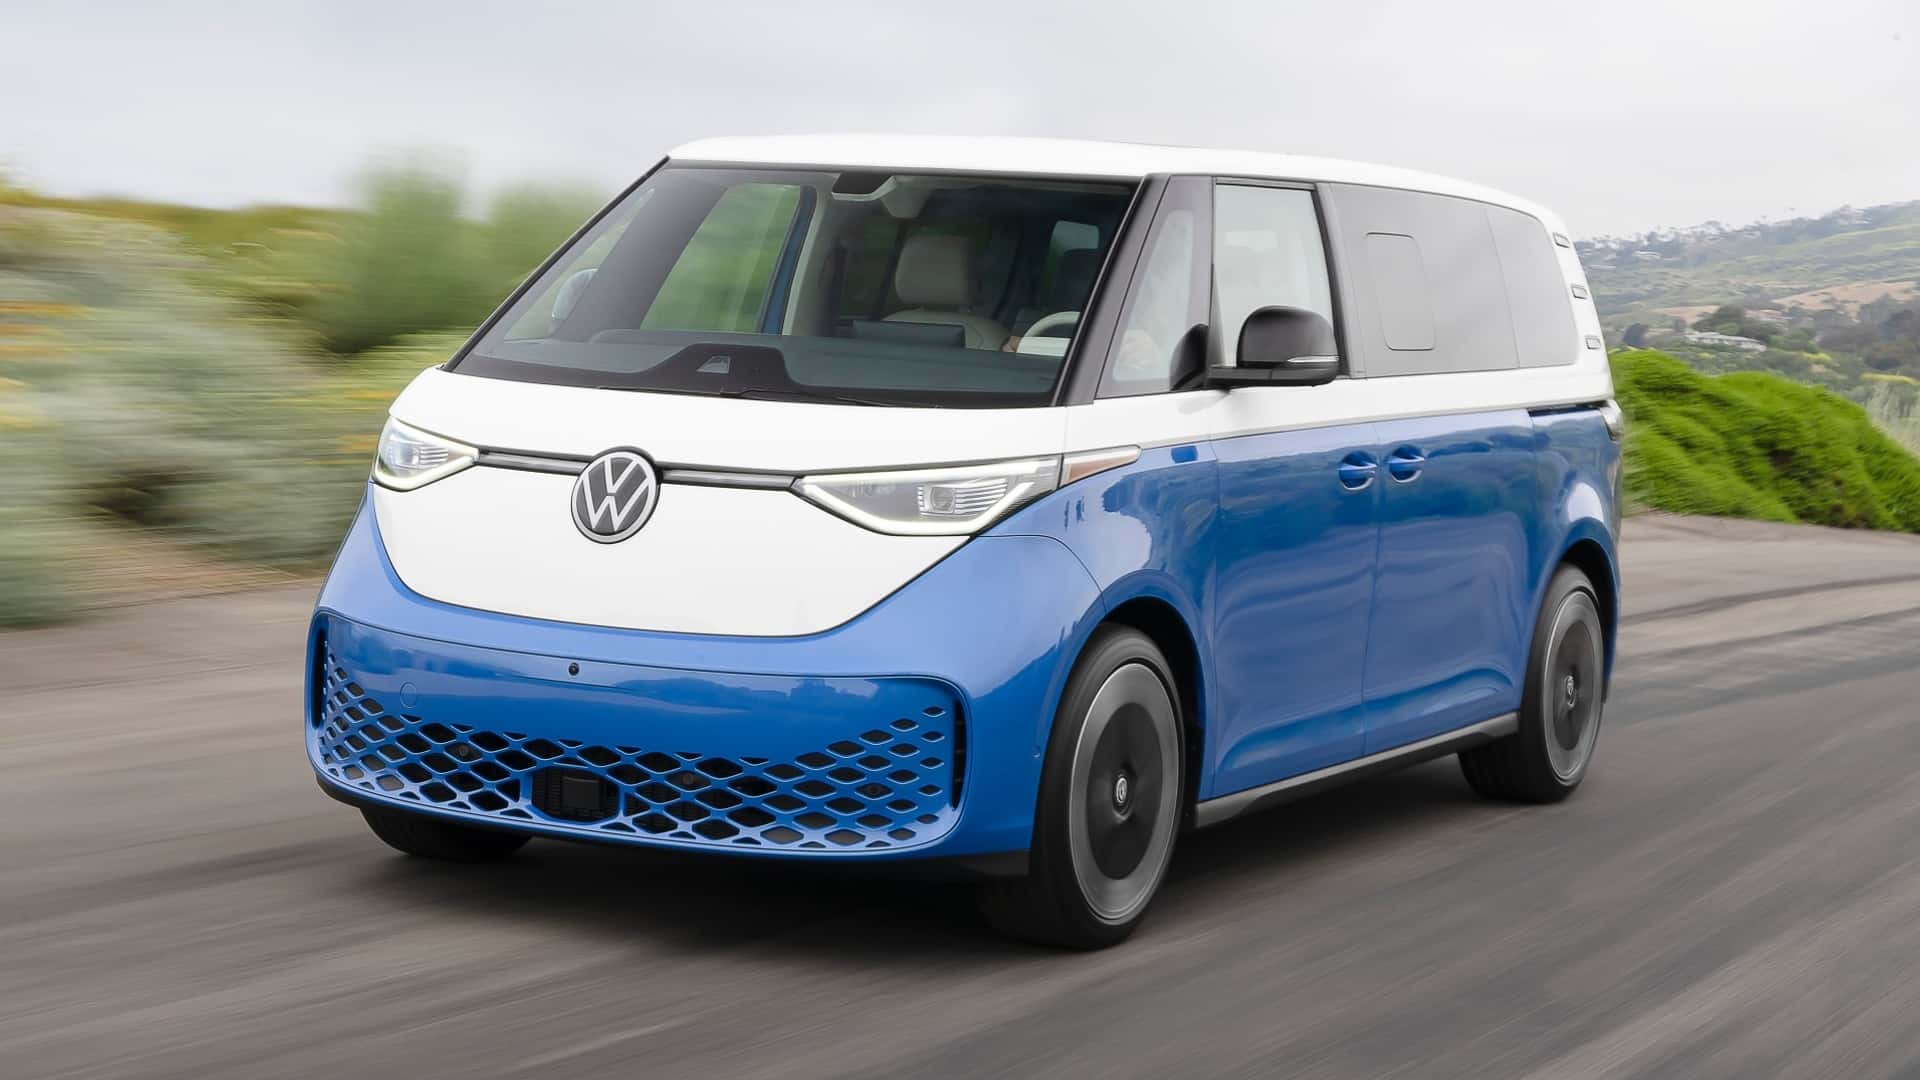 vw id. buzz california ev camper delayed due to weight concerns: report